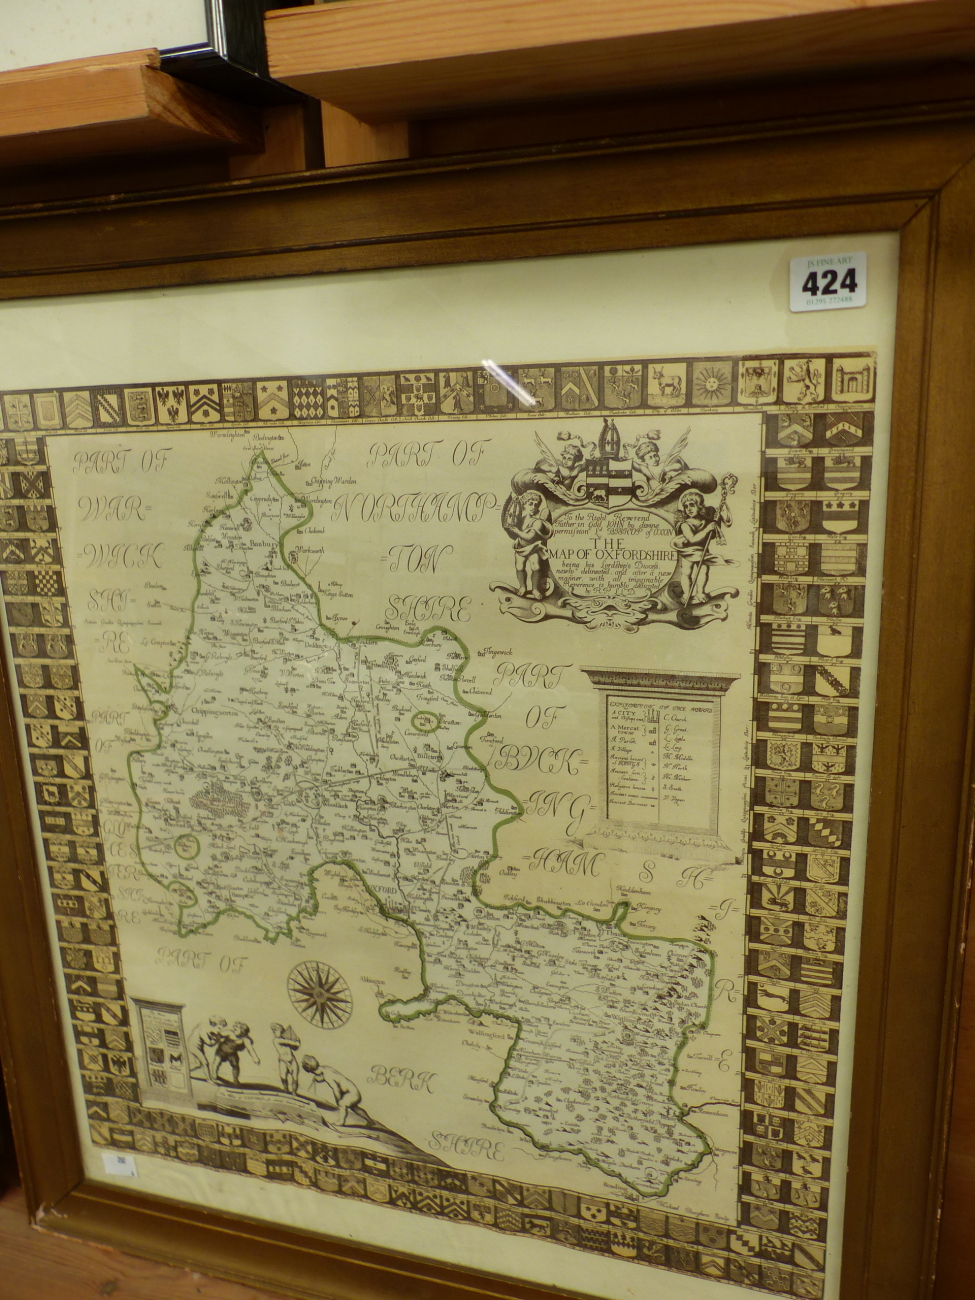 A COLOUR PRINT OF AN EARLY MAP OF OXFORDSHIRE